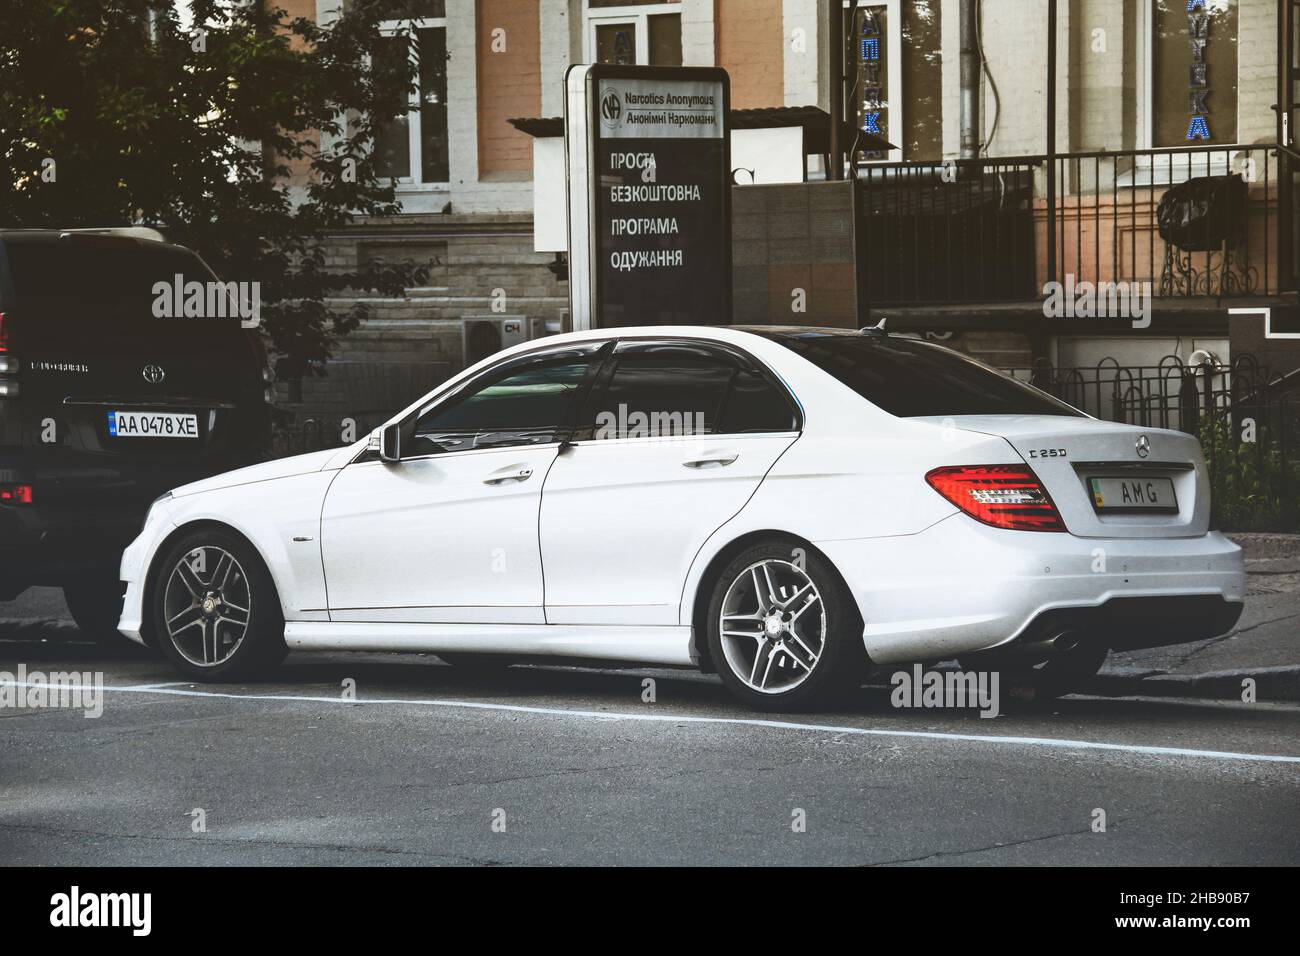 Kiev, Ukraine - May 22, 2021: White Mercedes-Benz C250 with AMG numbers is parked in the city Stock Photo